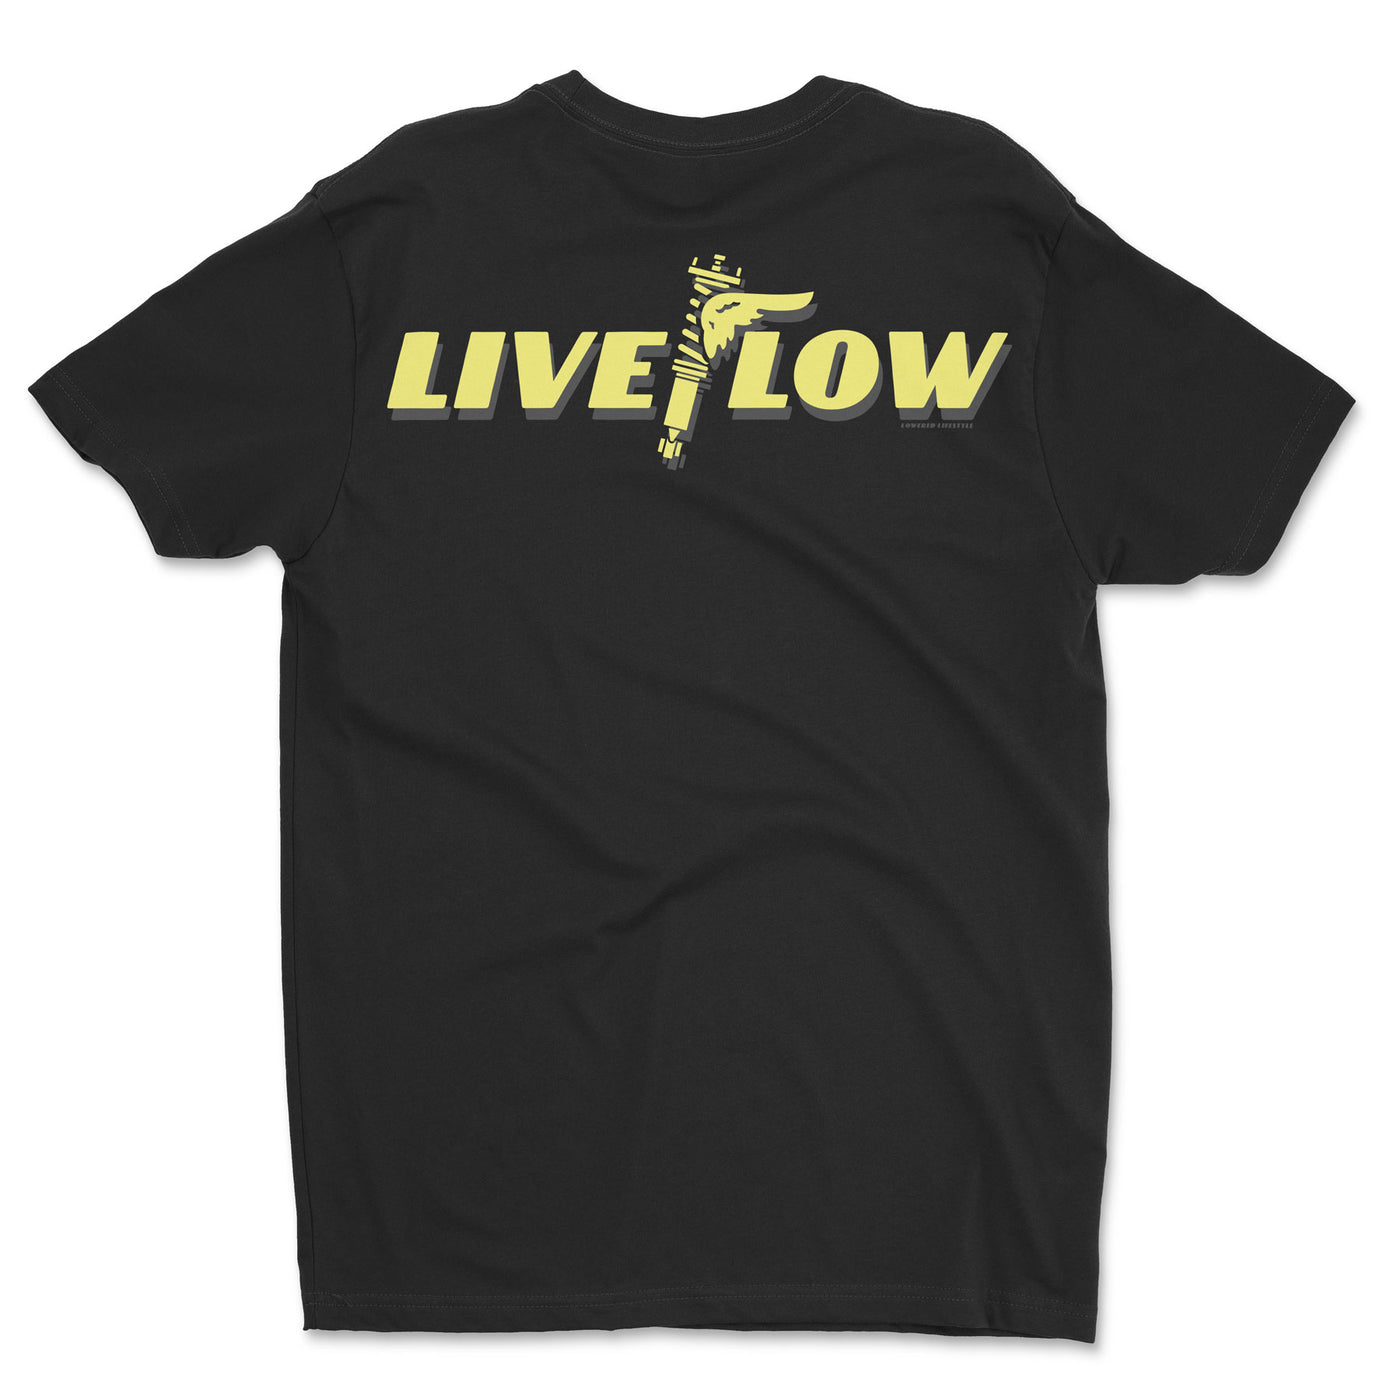 Live Low Winged Shirt